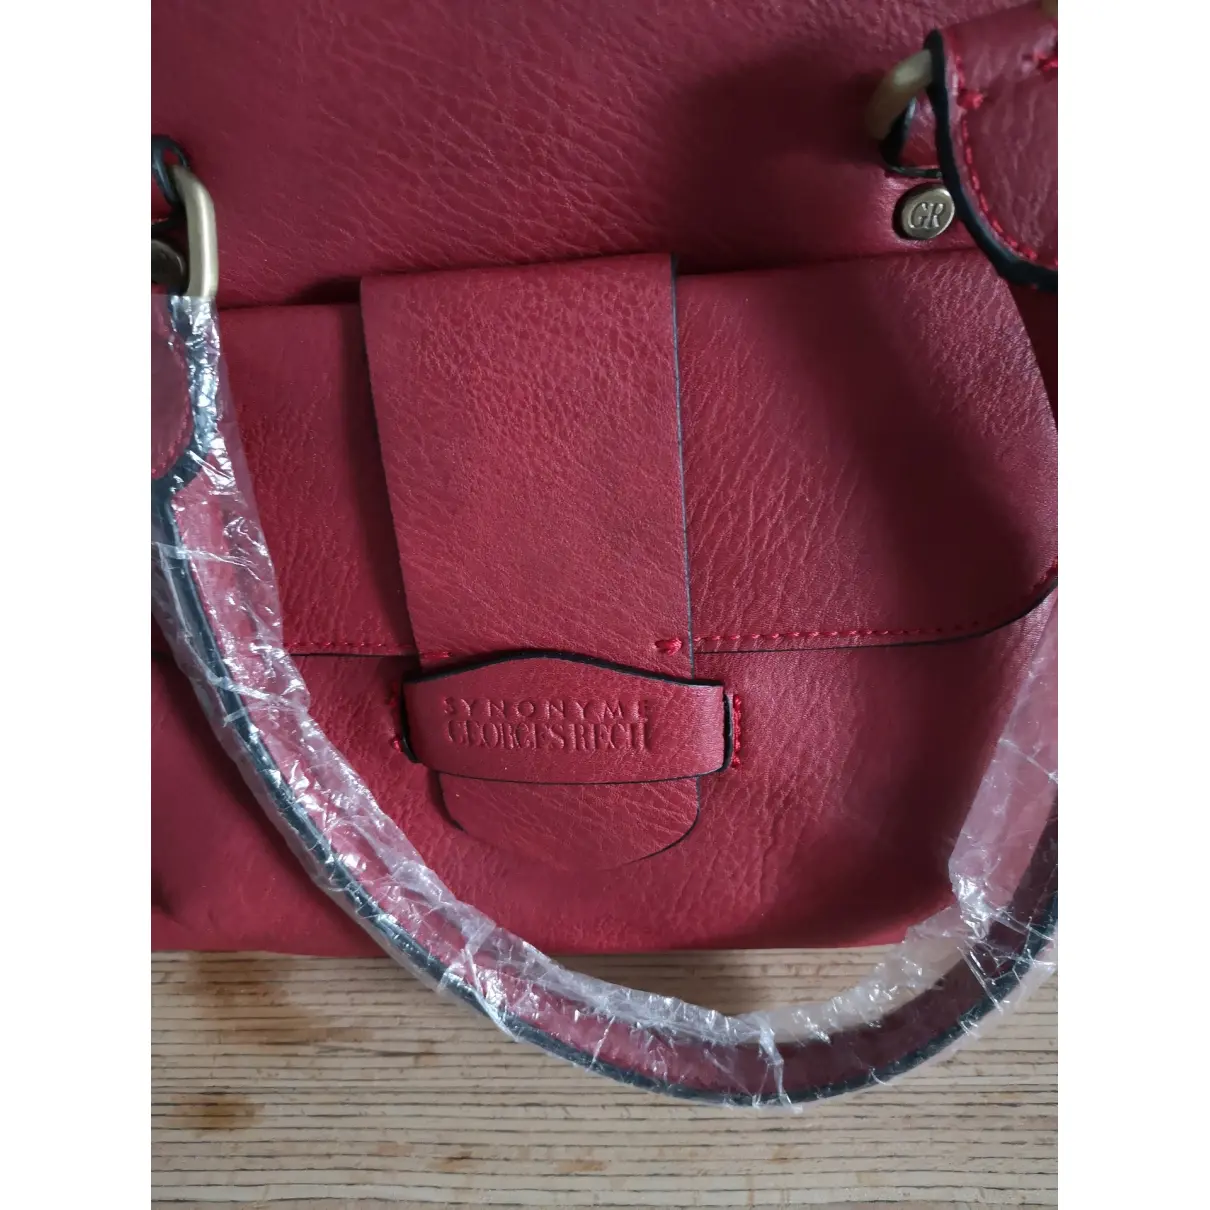 Leather crossbody bag Georges Rech